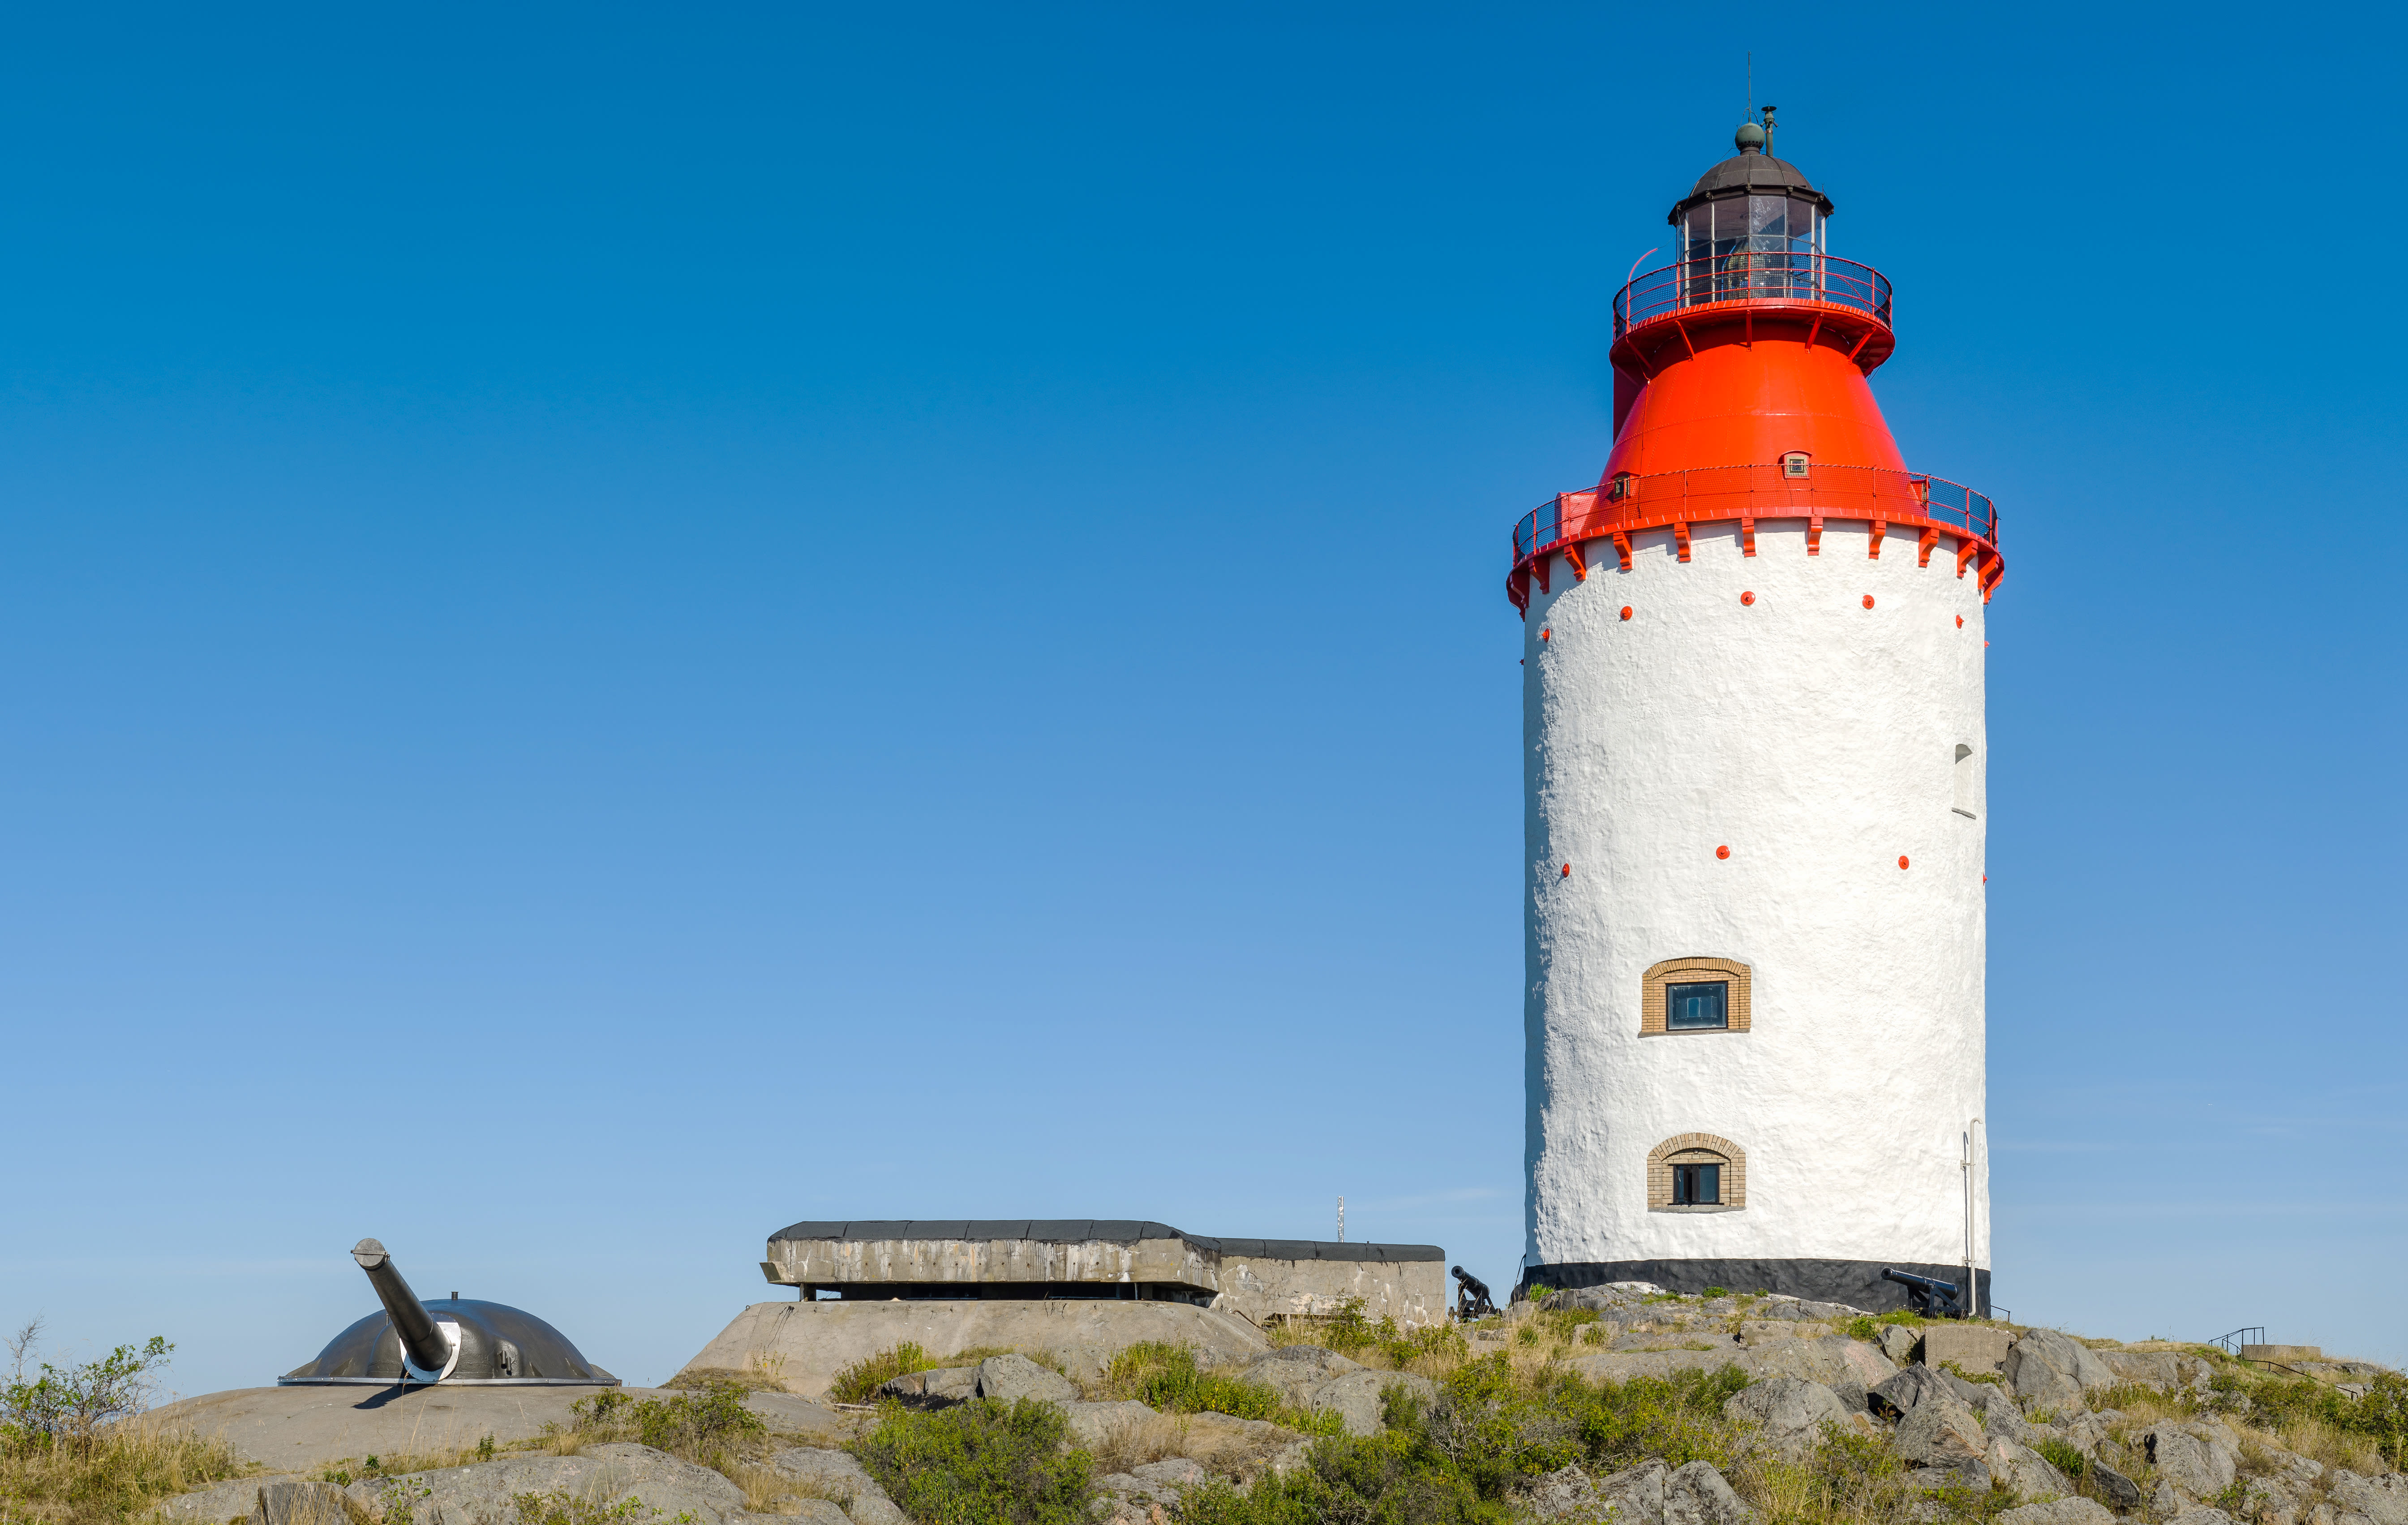 colour photograph of a white and red lighthouse against a bright blue sky